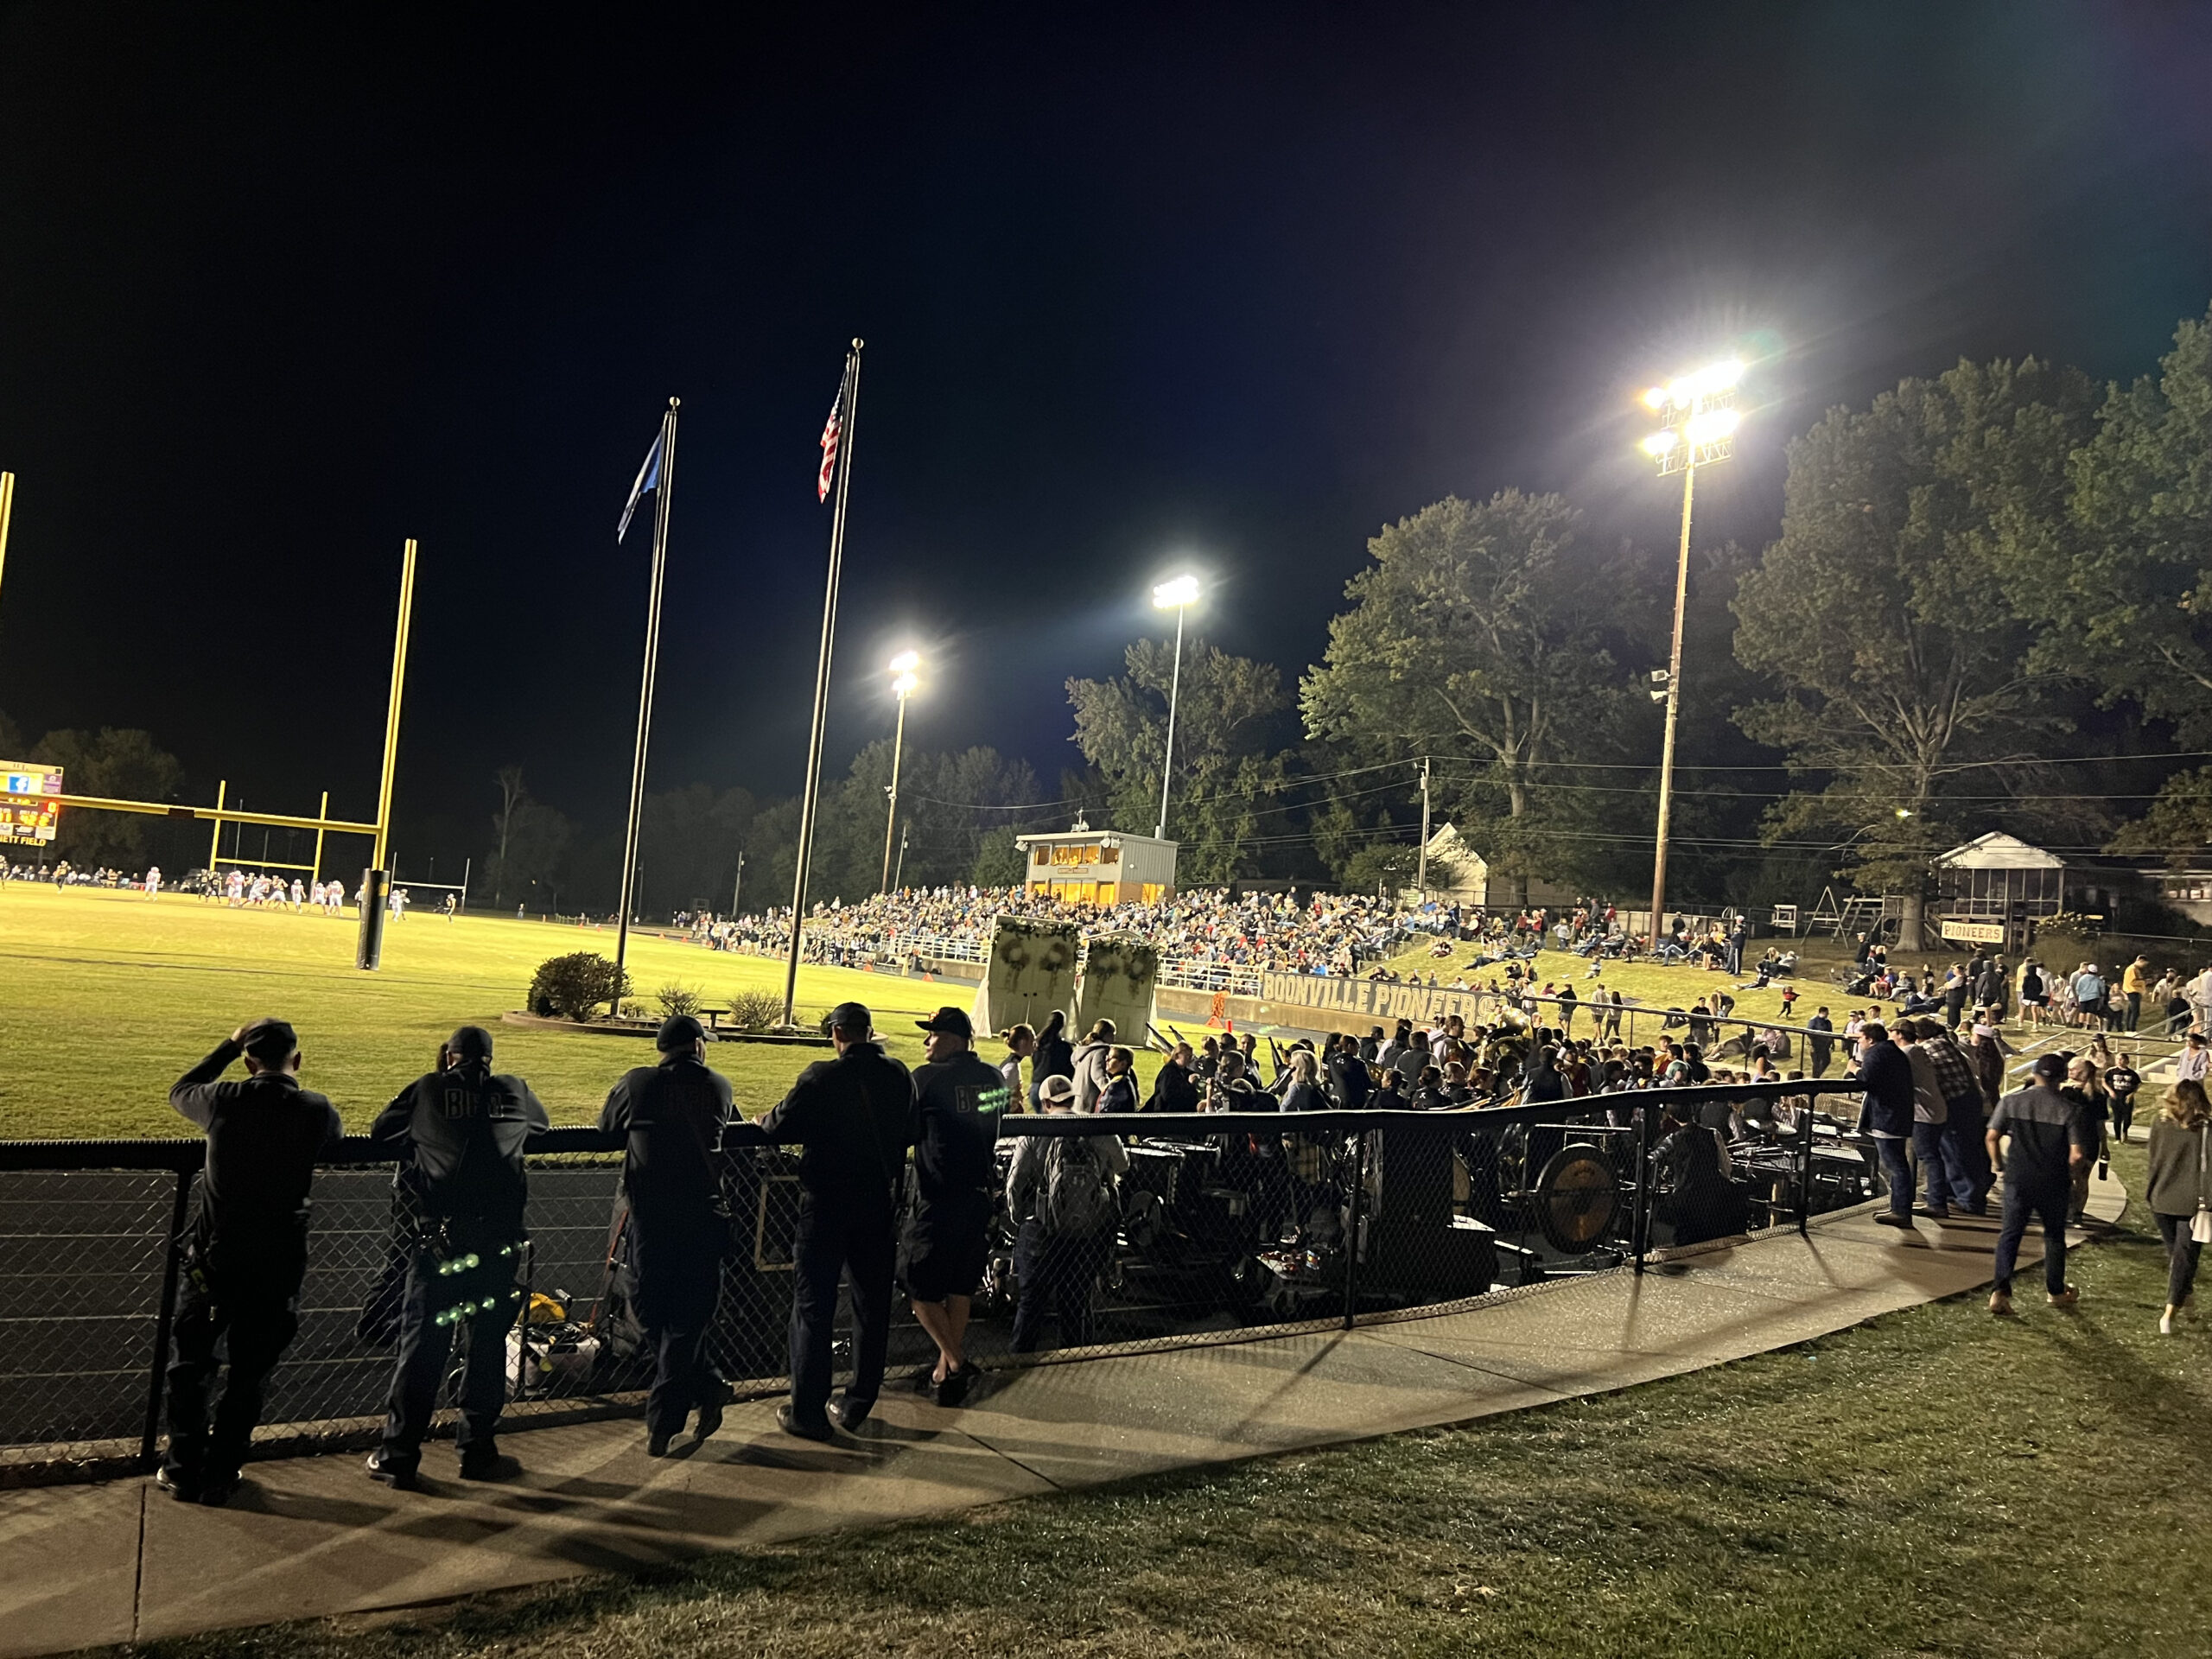 Friday Night Lights at Boonville High School, Boonville Indiana